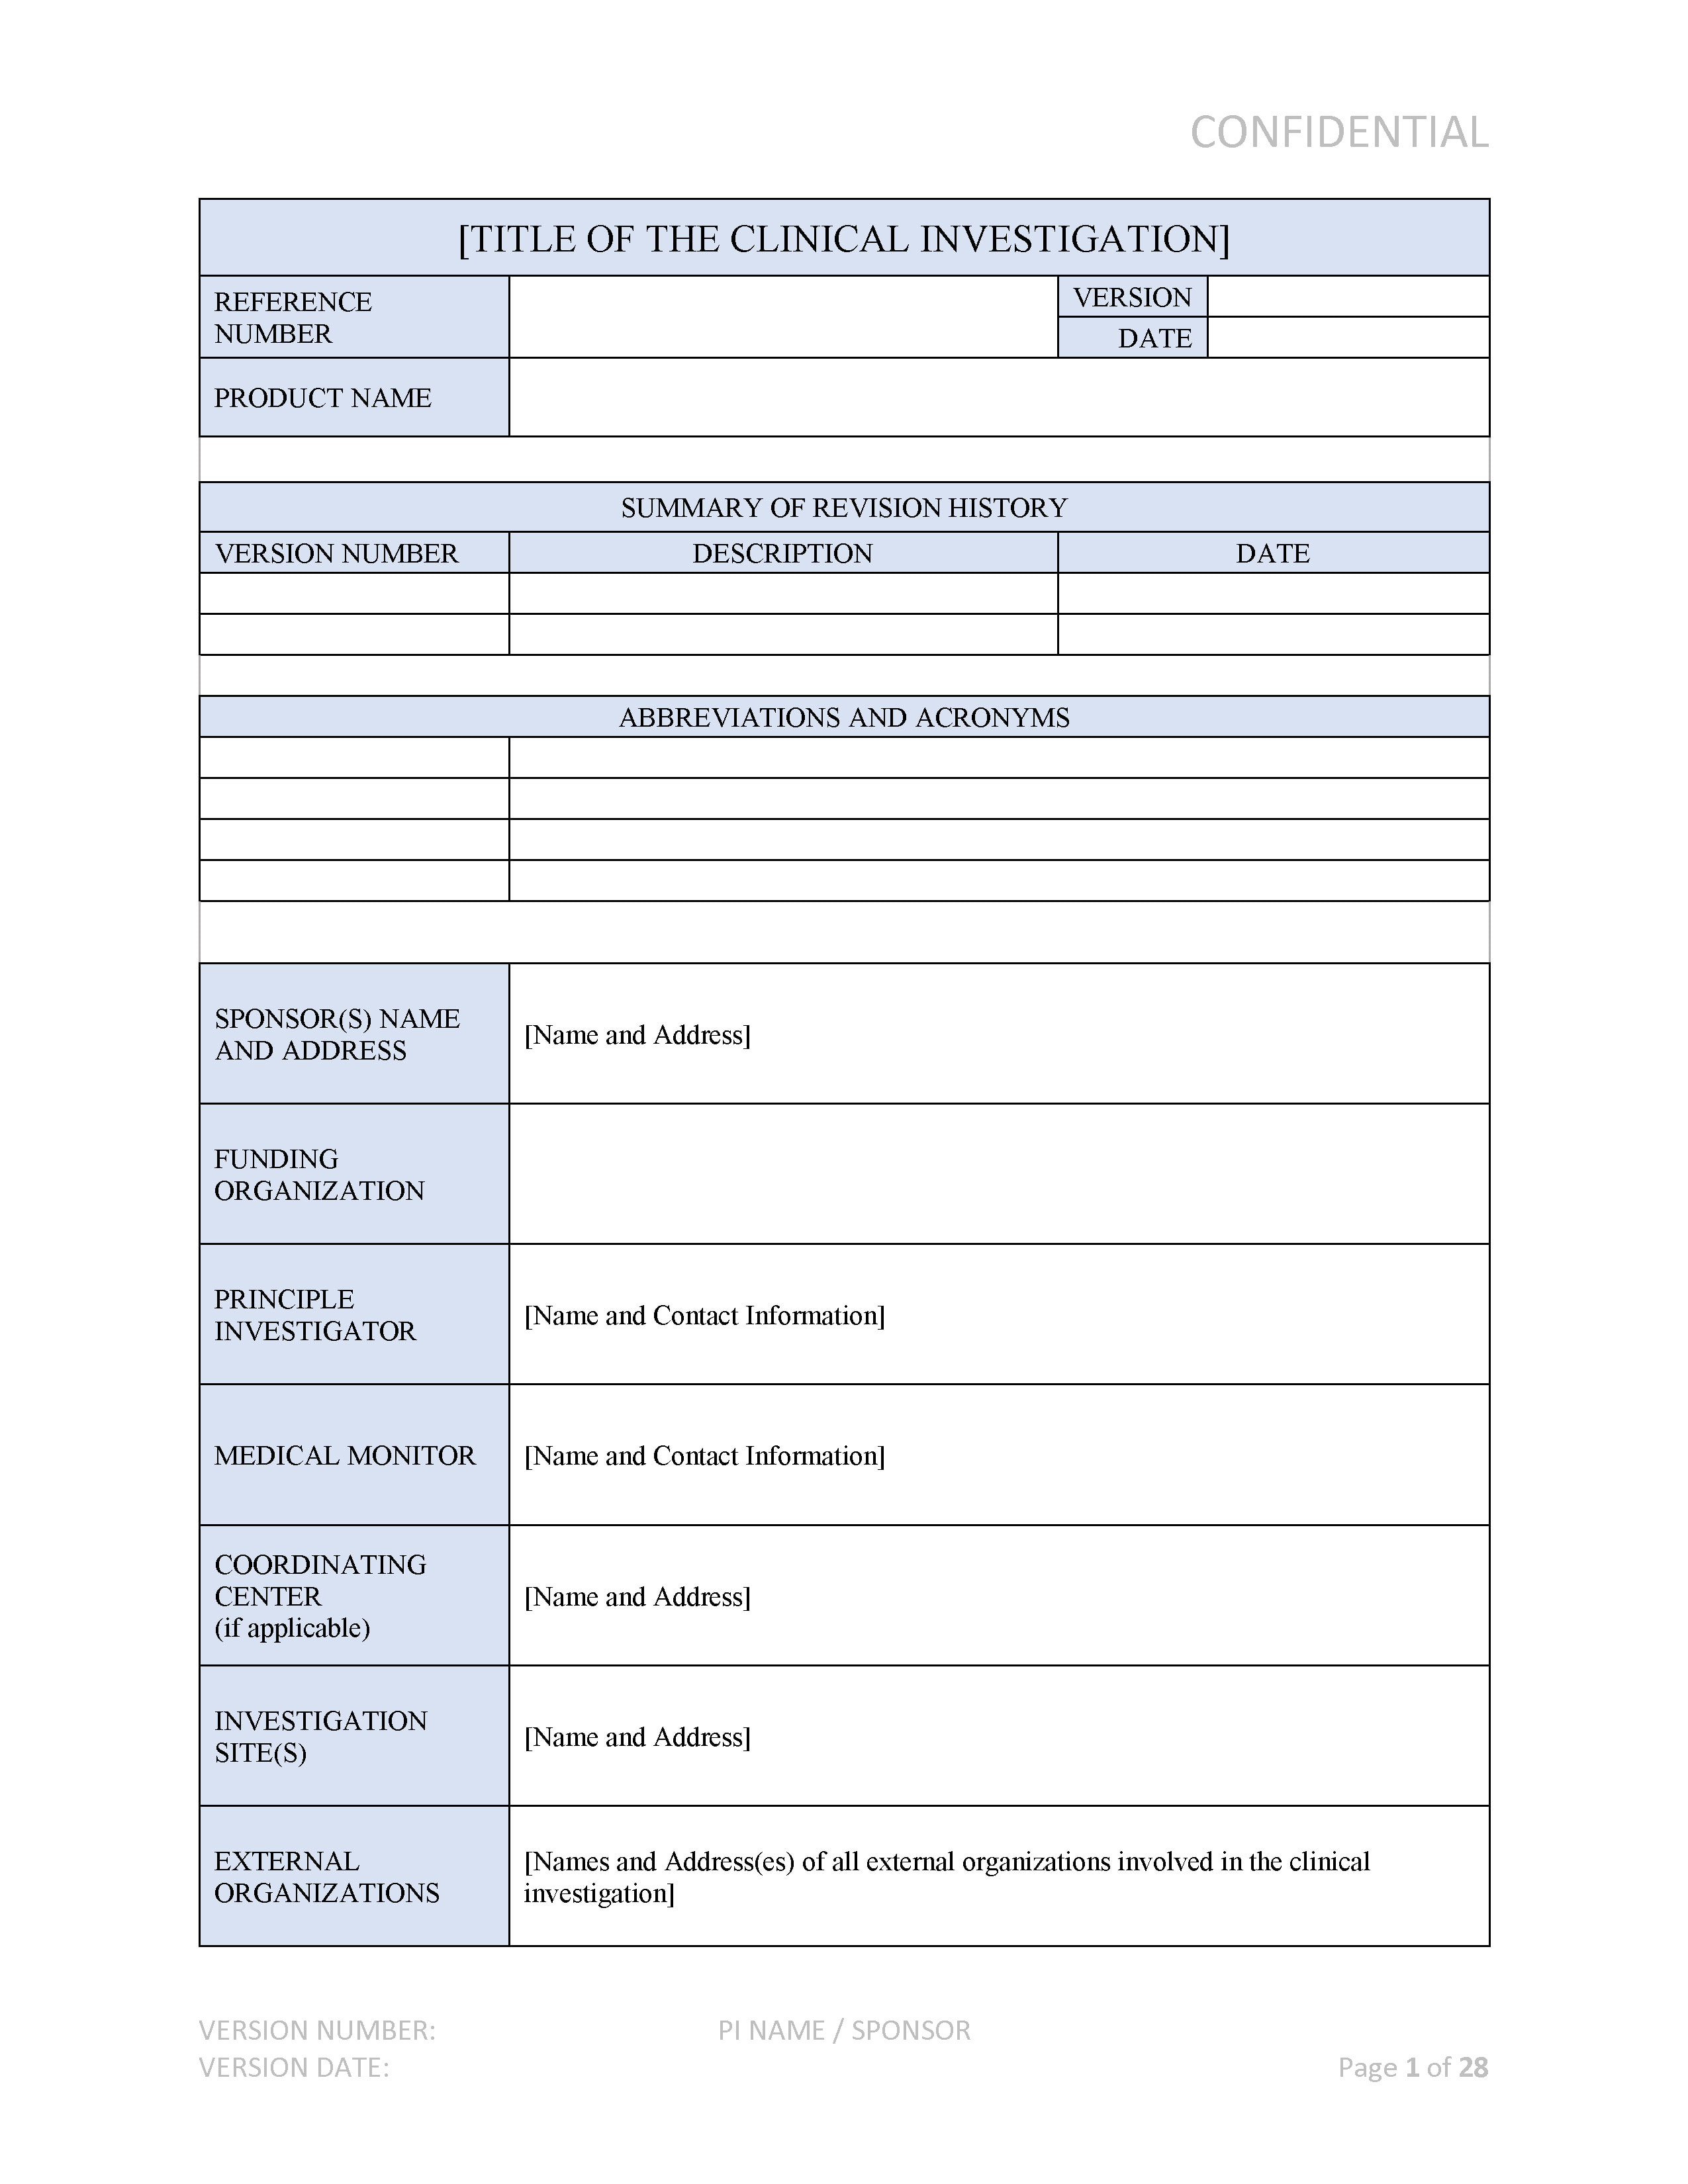 Medical Device Clinical Investigation Plan (CIP) ISO 141552020 Compliant